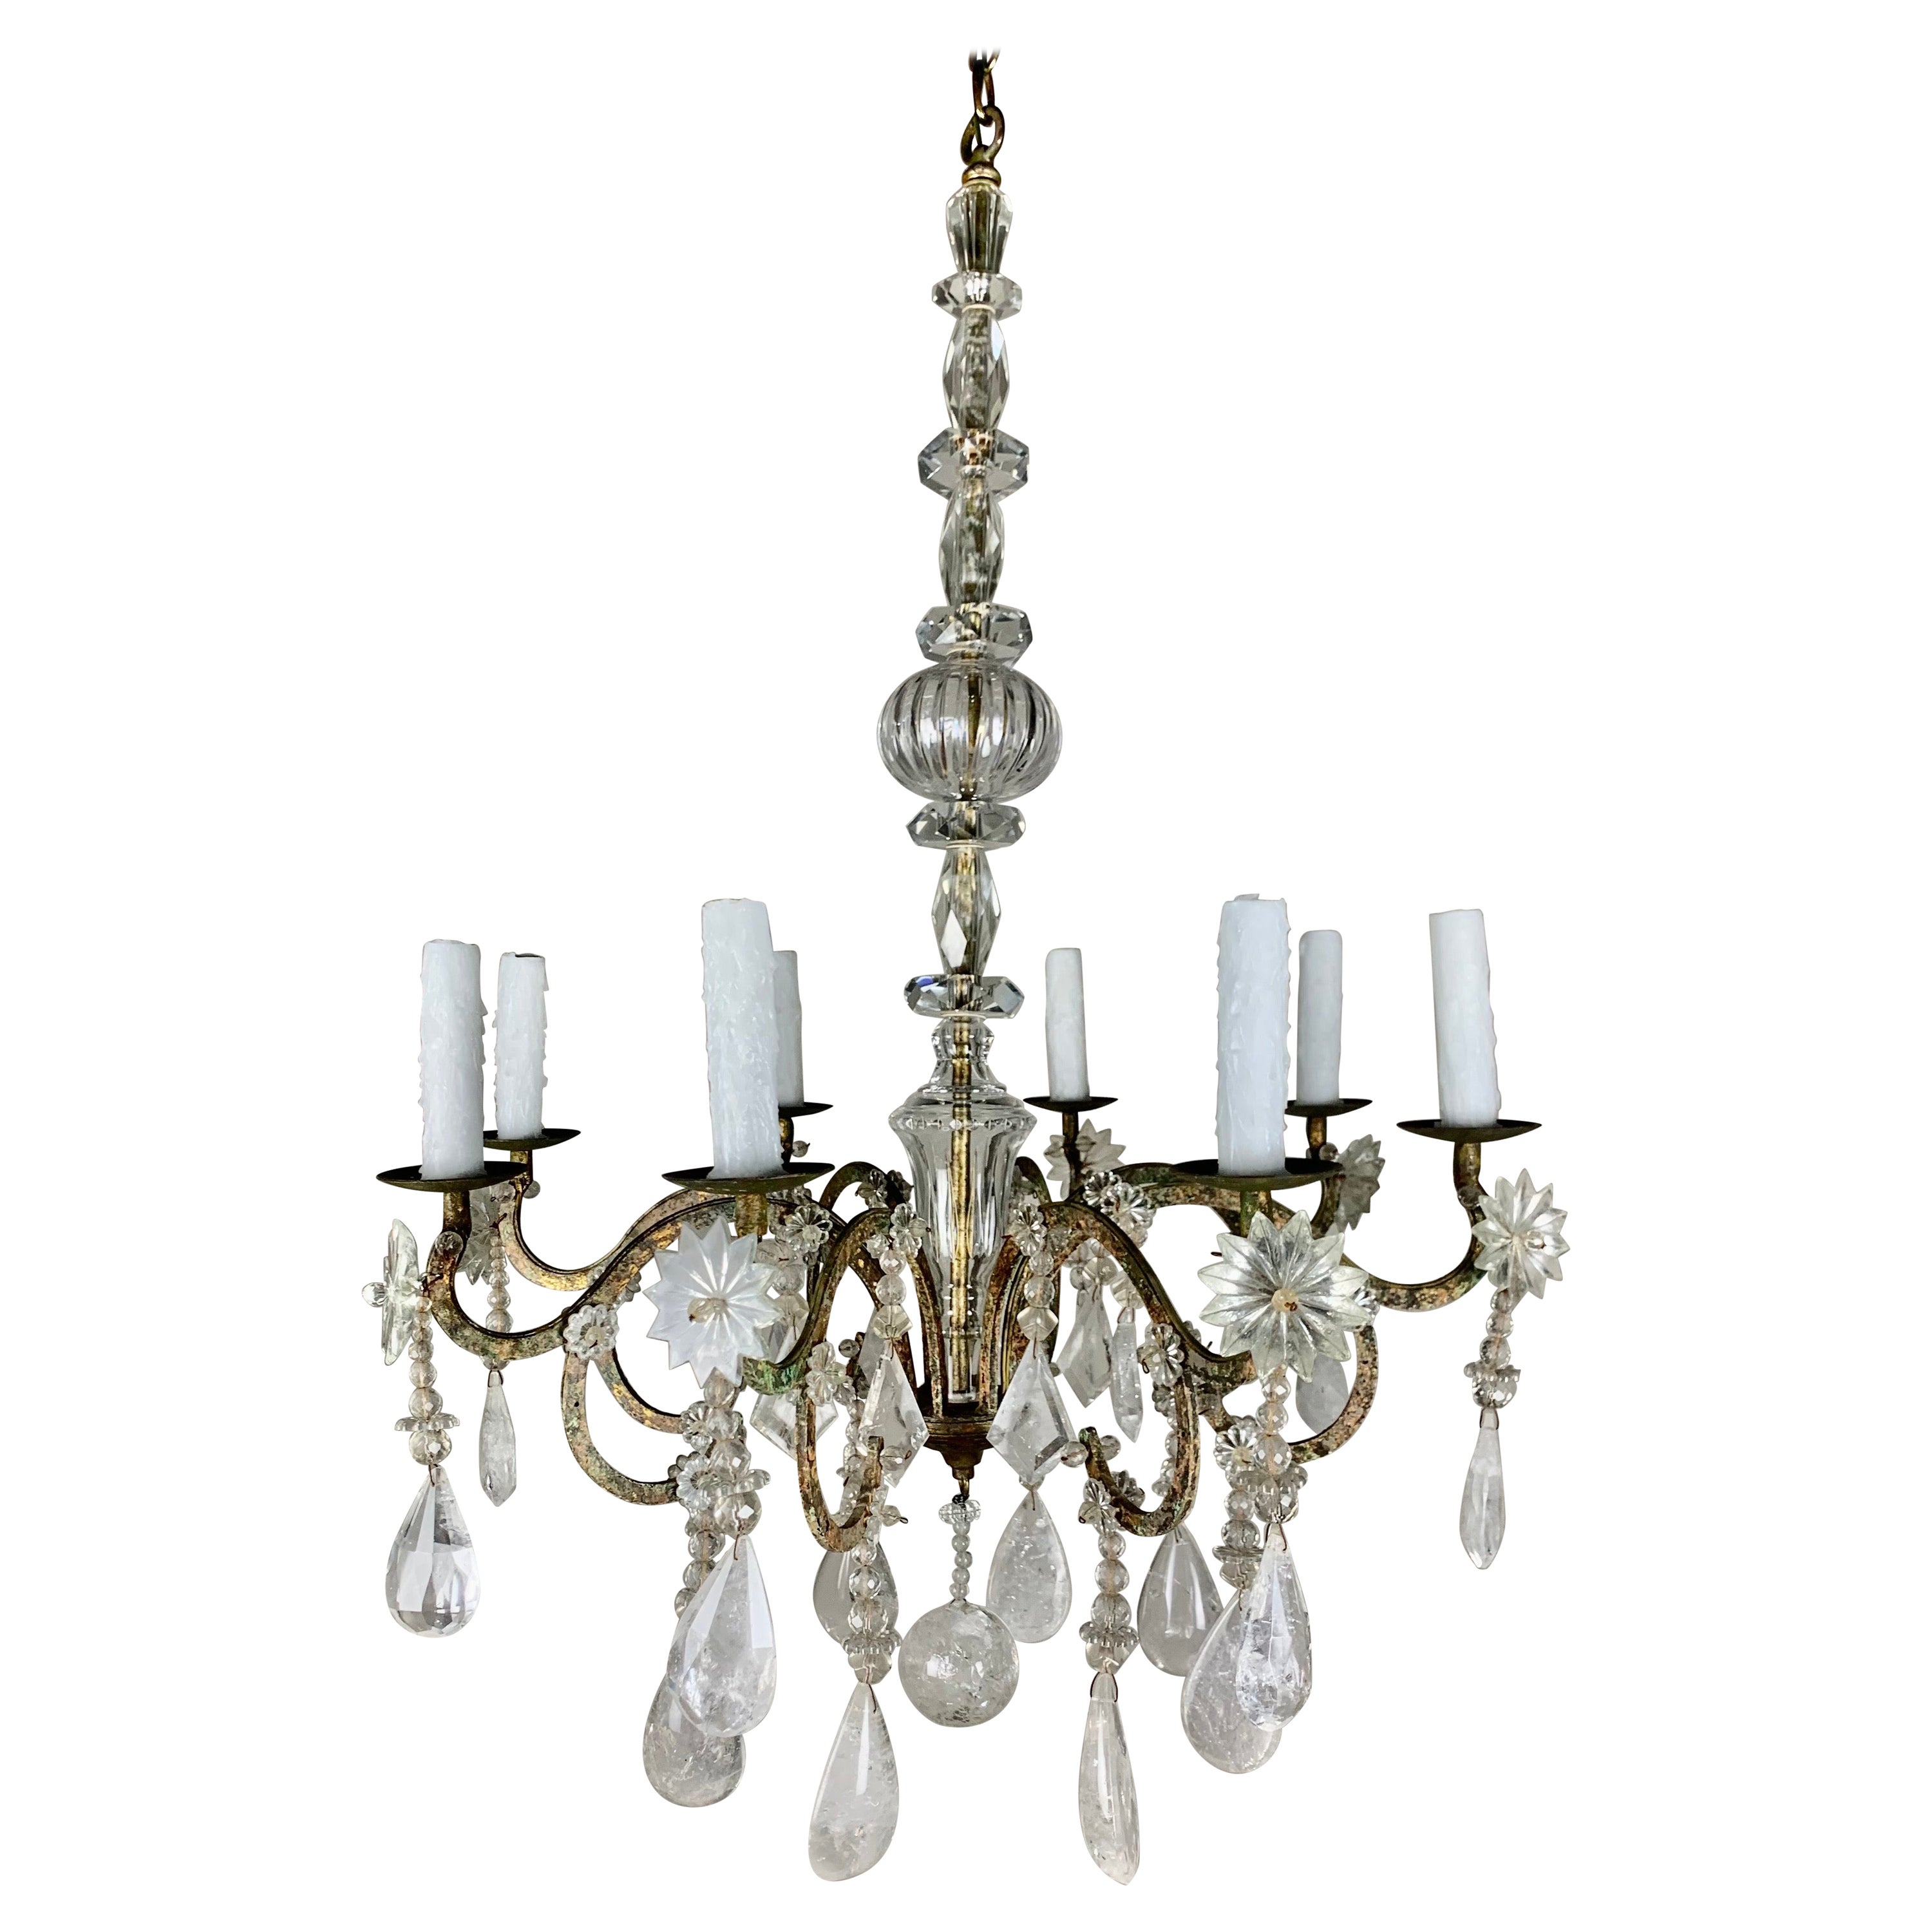 Eight Light Rock Crystal Chandelier C. 1930's For Sale